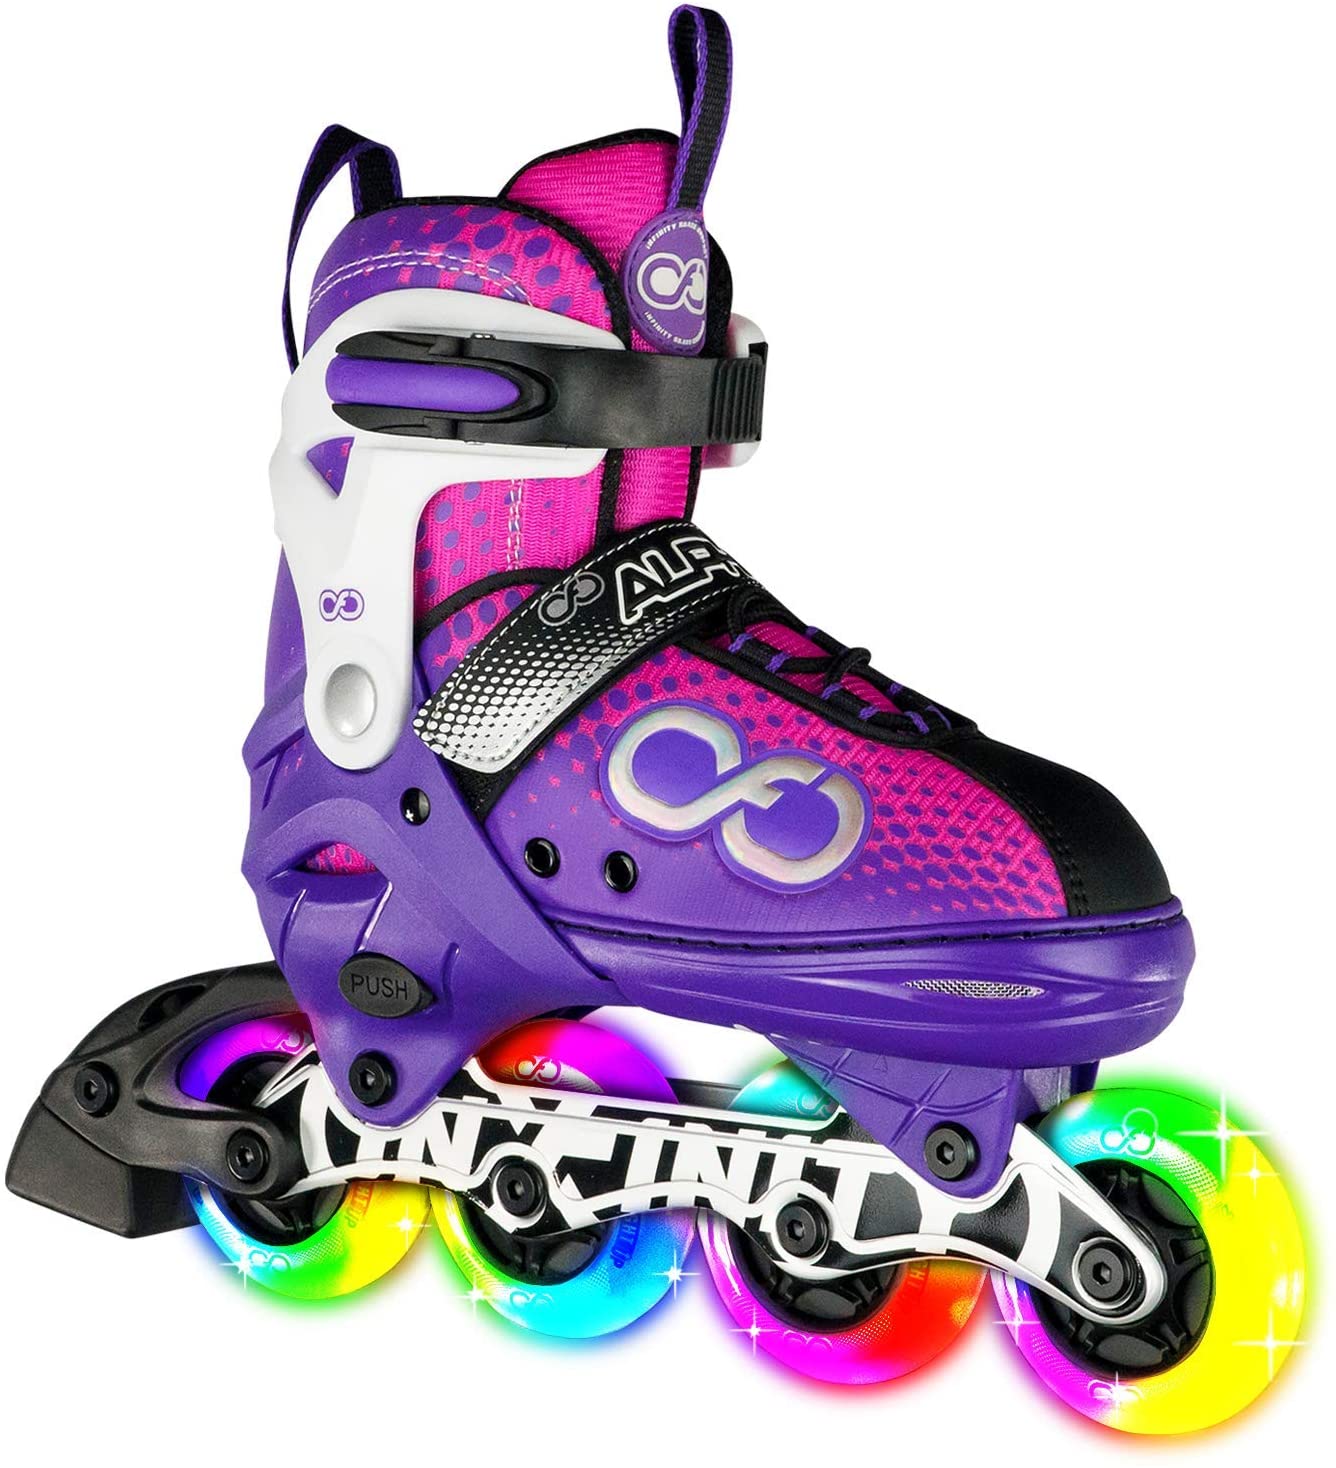 Available in Four Colors Crazy Skates Adjustable Inline Skates with Light Up Wheels 